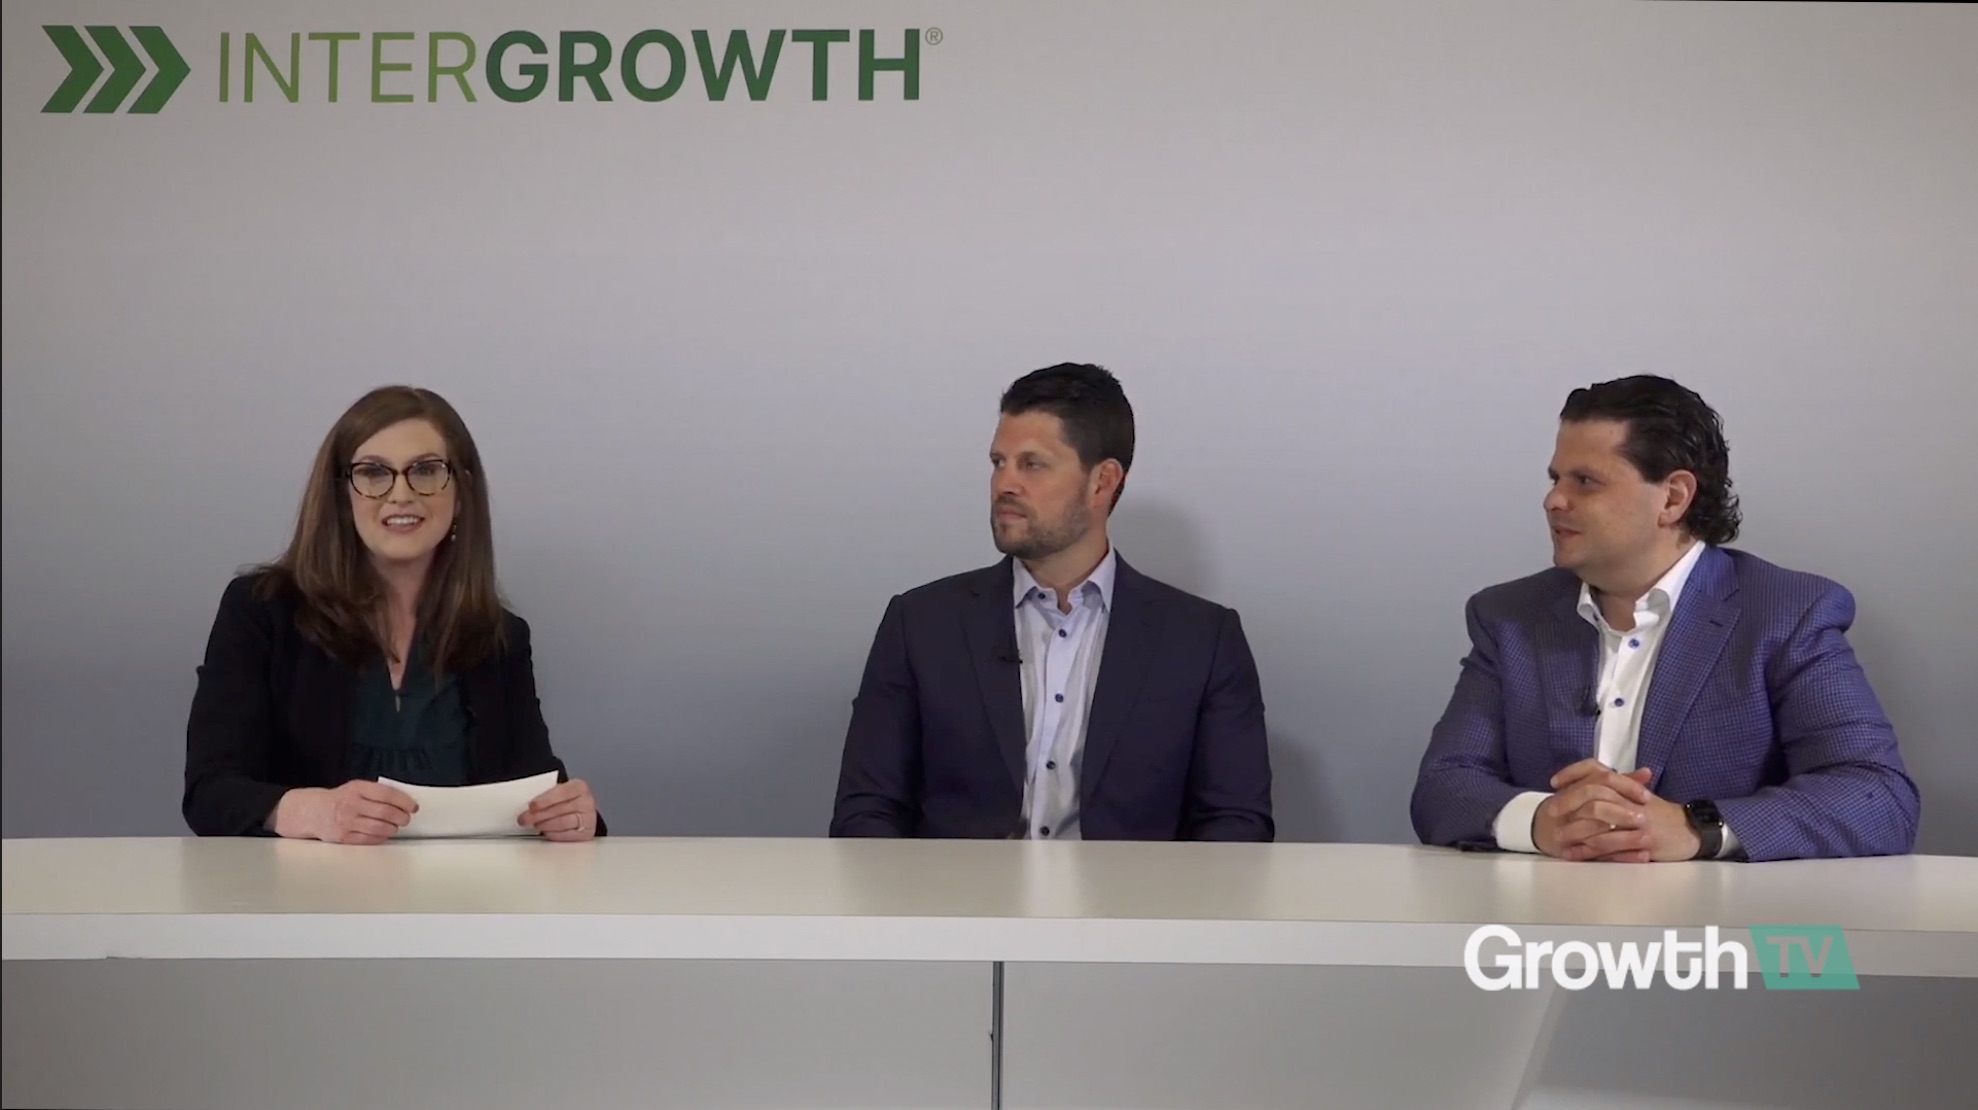 growthtv-antares-capital-financial-services-investment-innovation